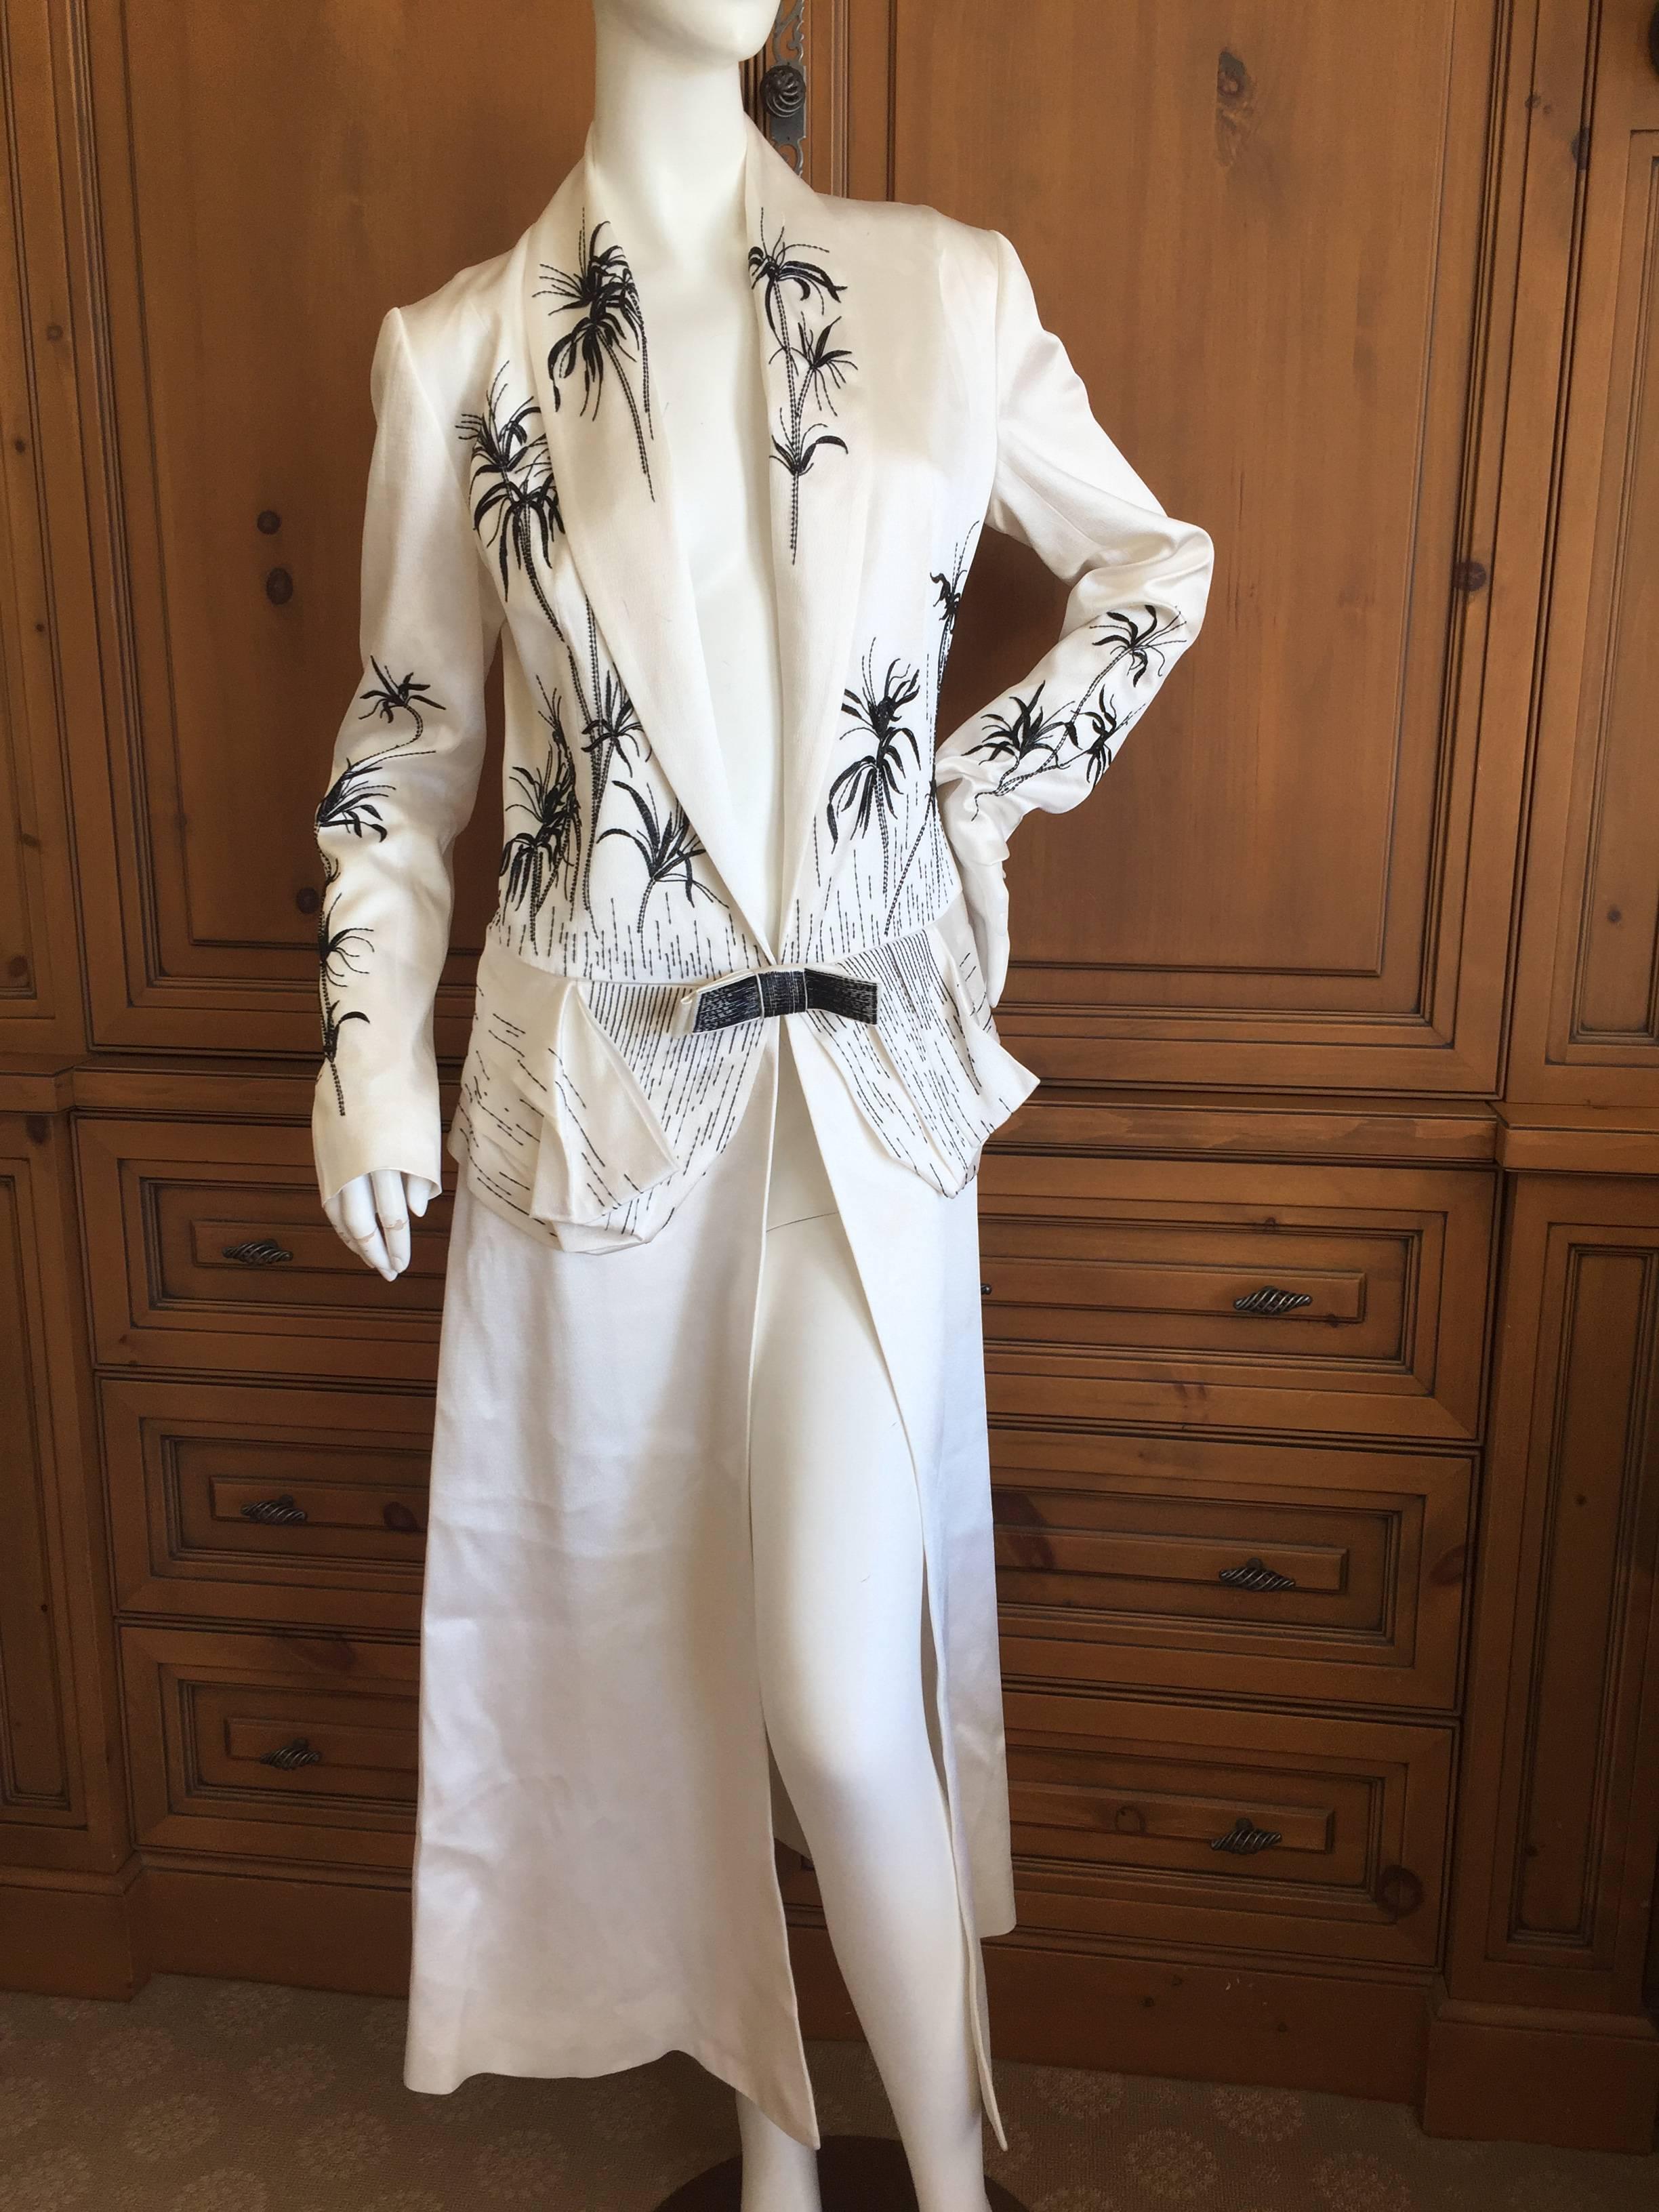 Christian Dior by Gianfranco Ferre White Hammered Silk Beaded Evening Coat For Sale 5